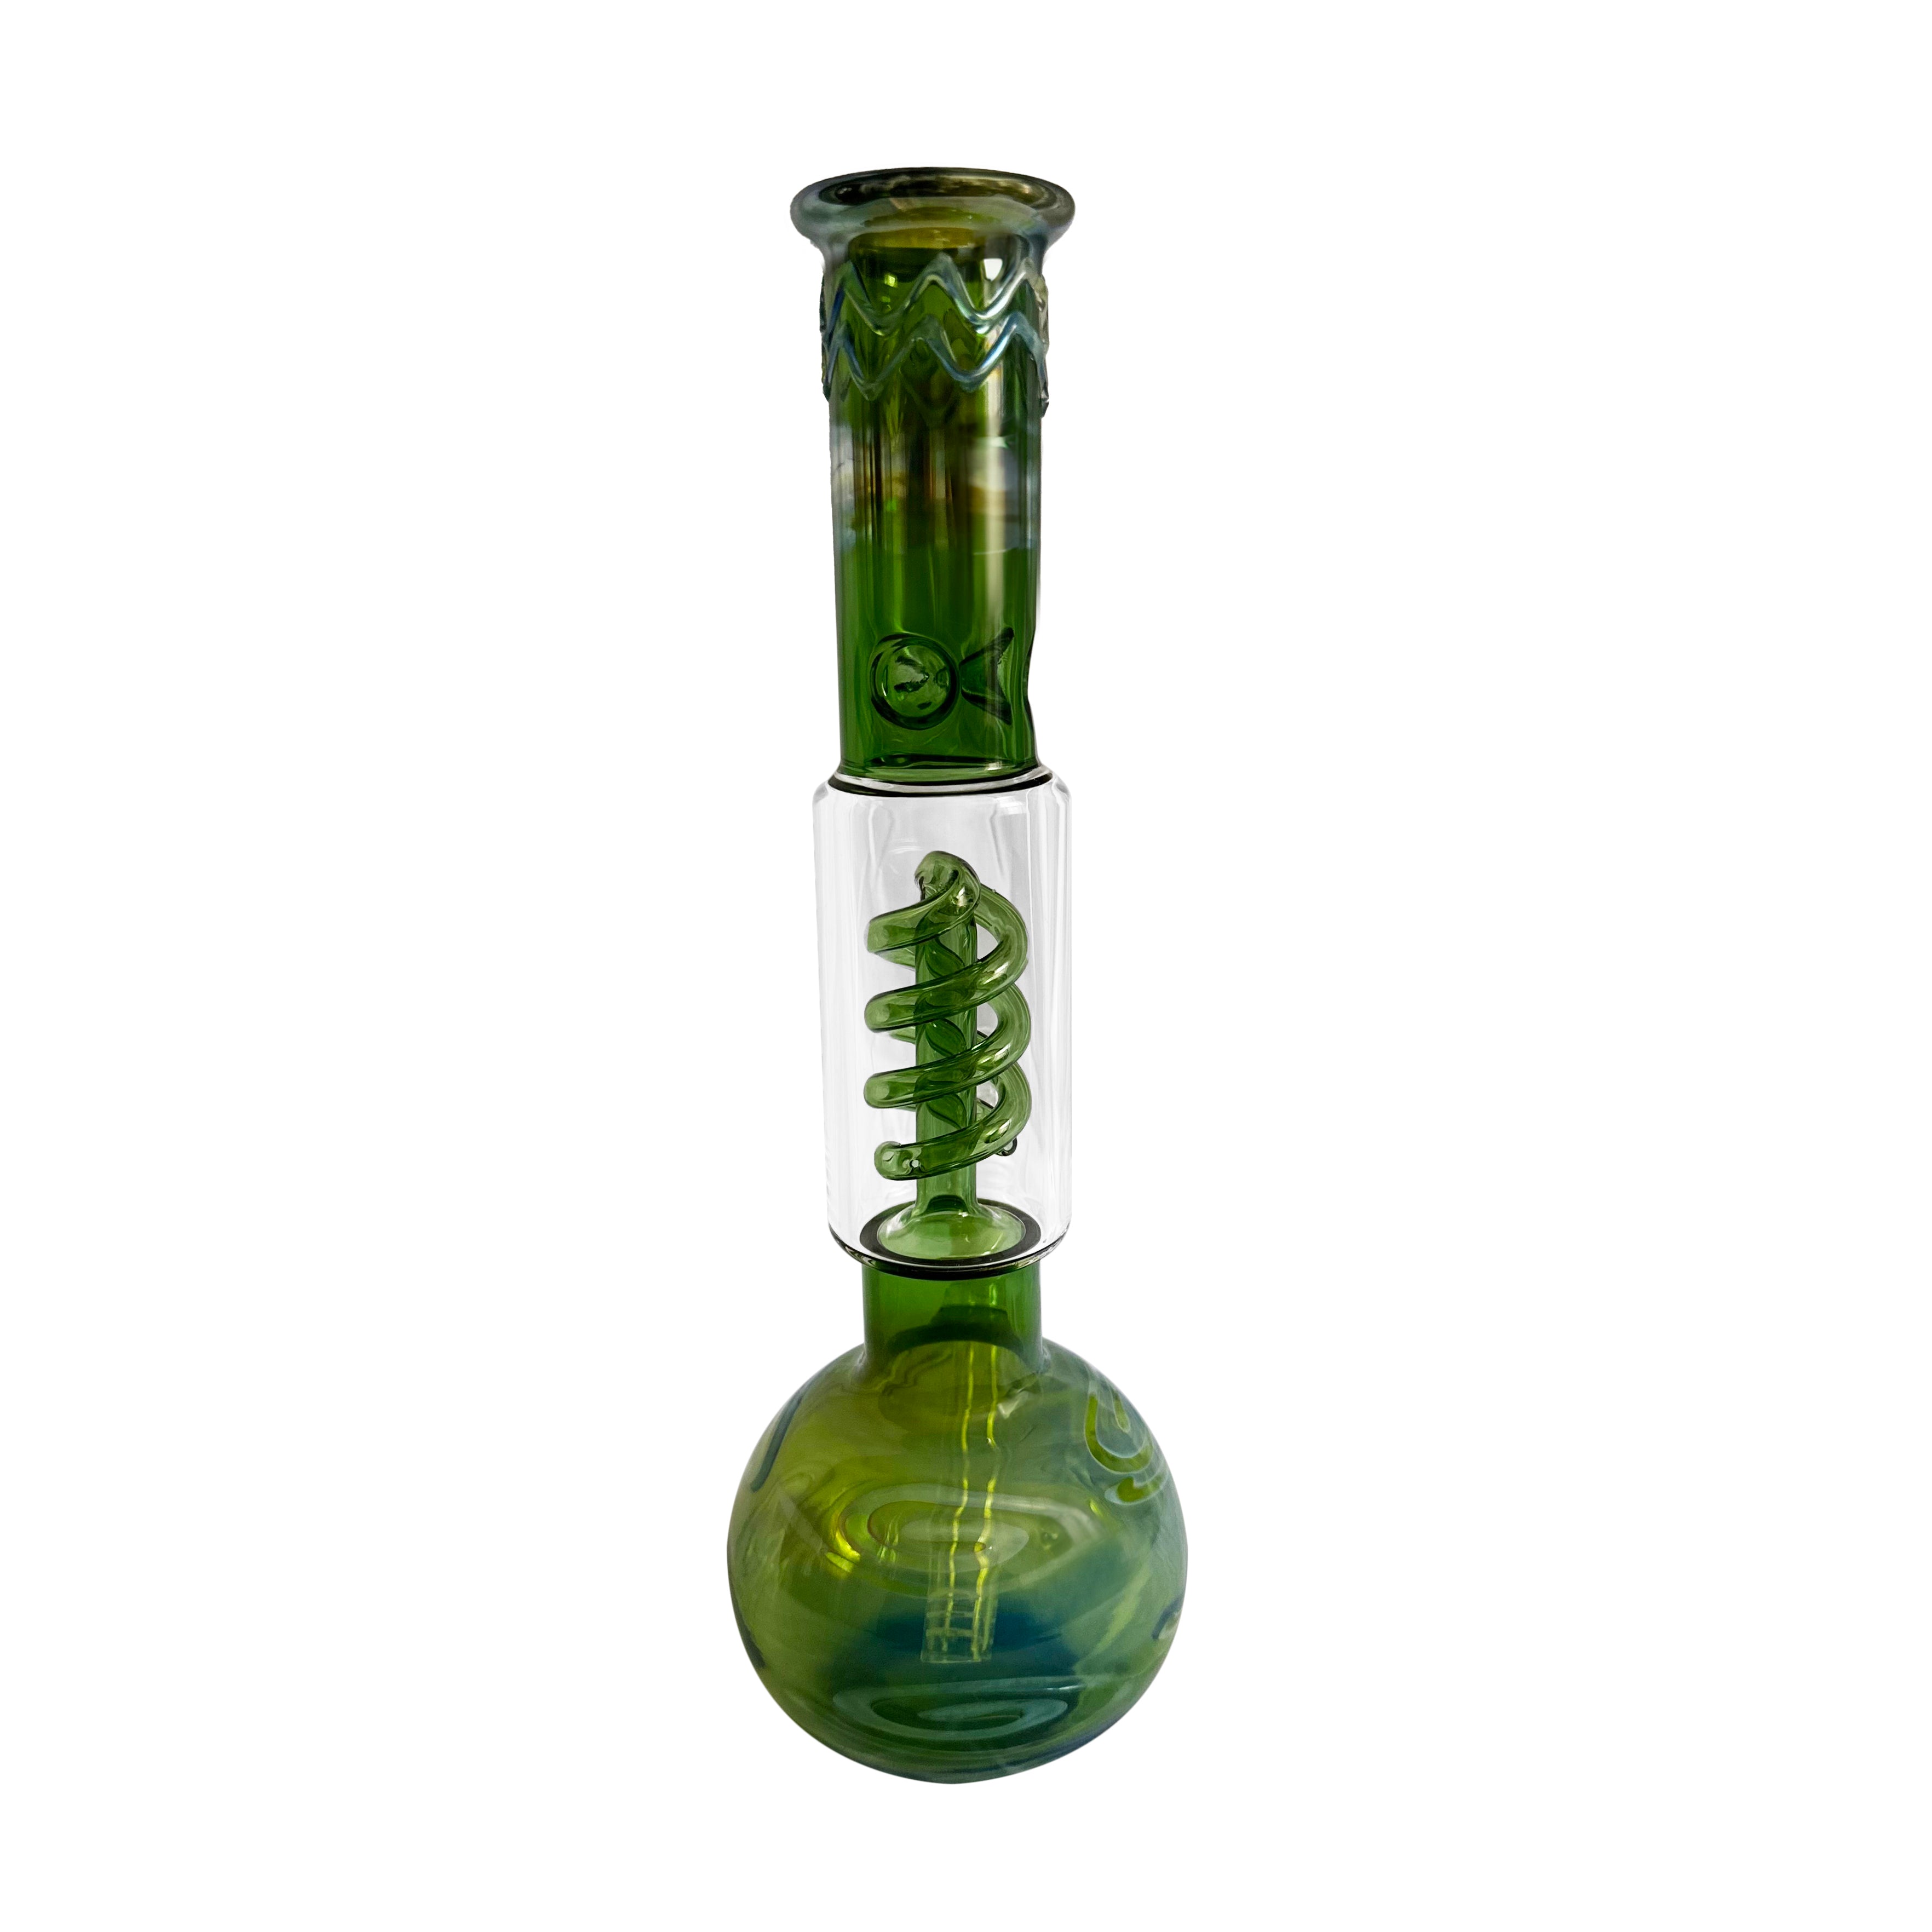 Hi-Lyfe's Lima Bean - Compact Cannabis Glassware with 10mm bowl